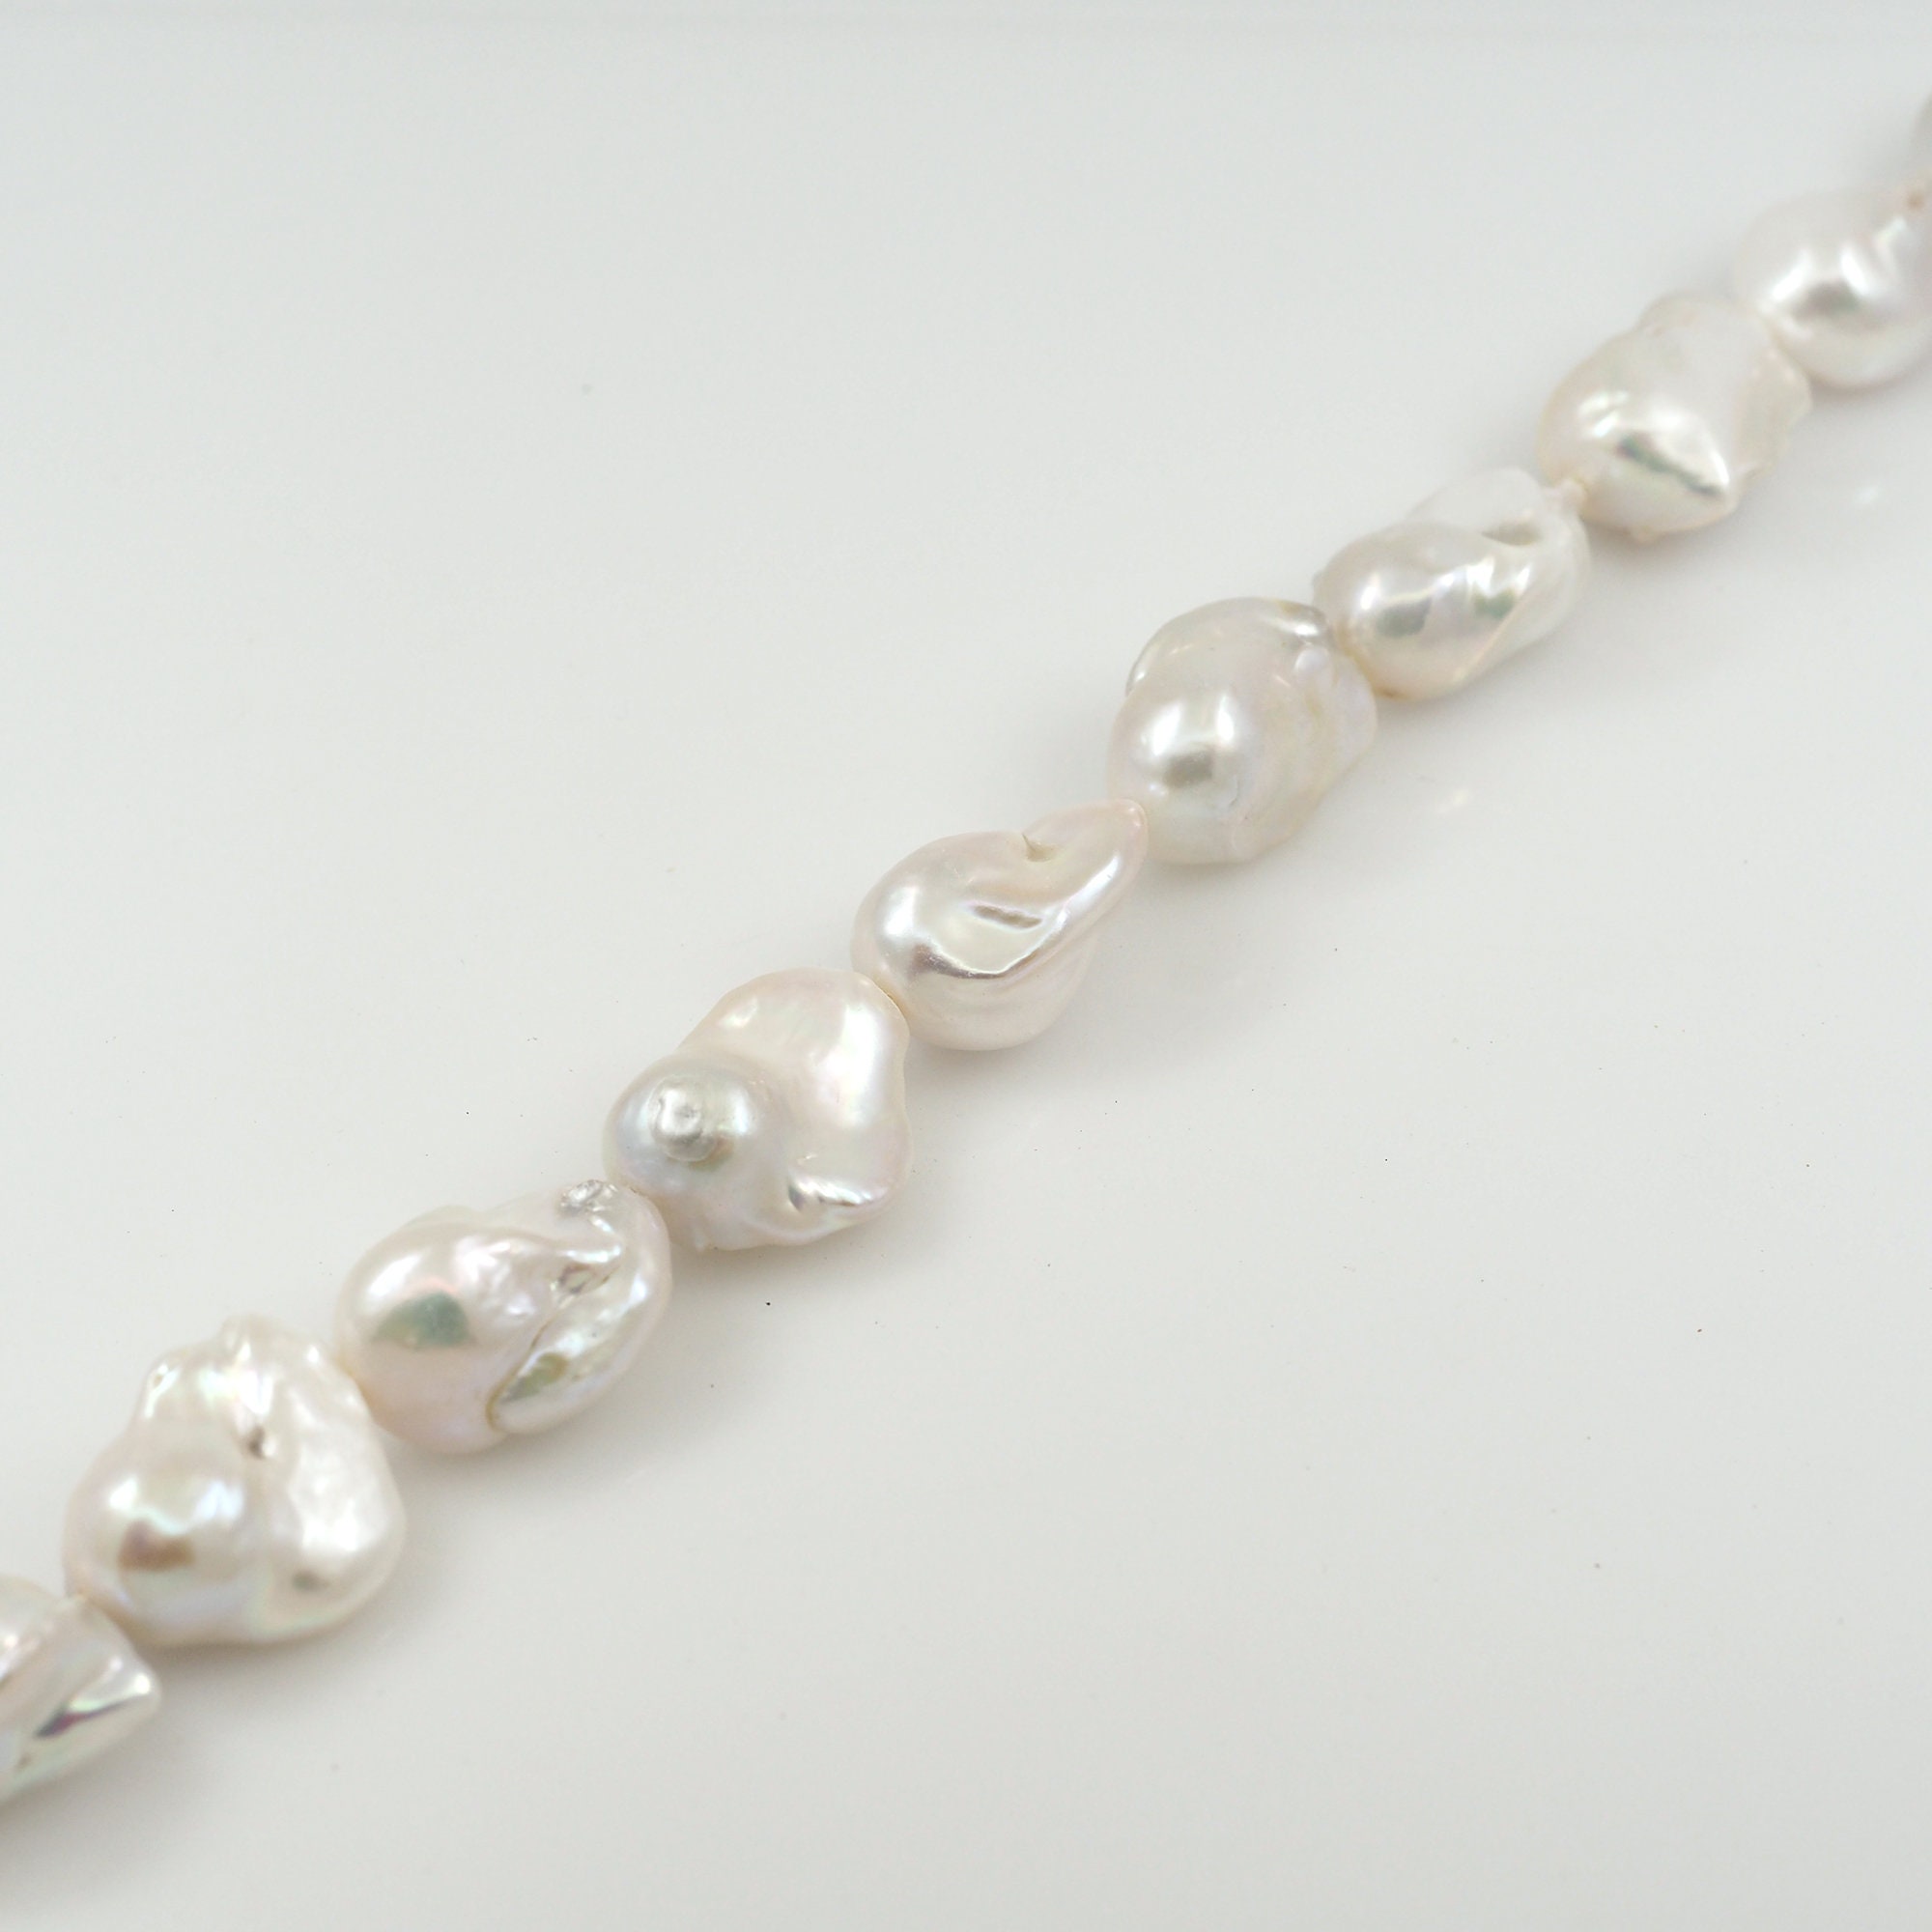 1 Str,DIY Pearl Accessories, AAA Pearl Necklace, Gold Pearl Chain,  Rice-Shaped Pearl,Real Freshwater Pearl, 5-6mm, Length 35mm